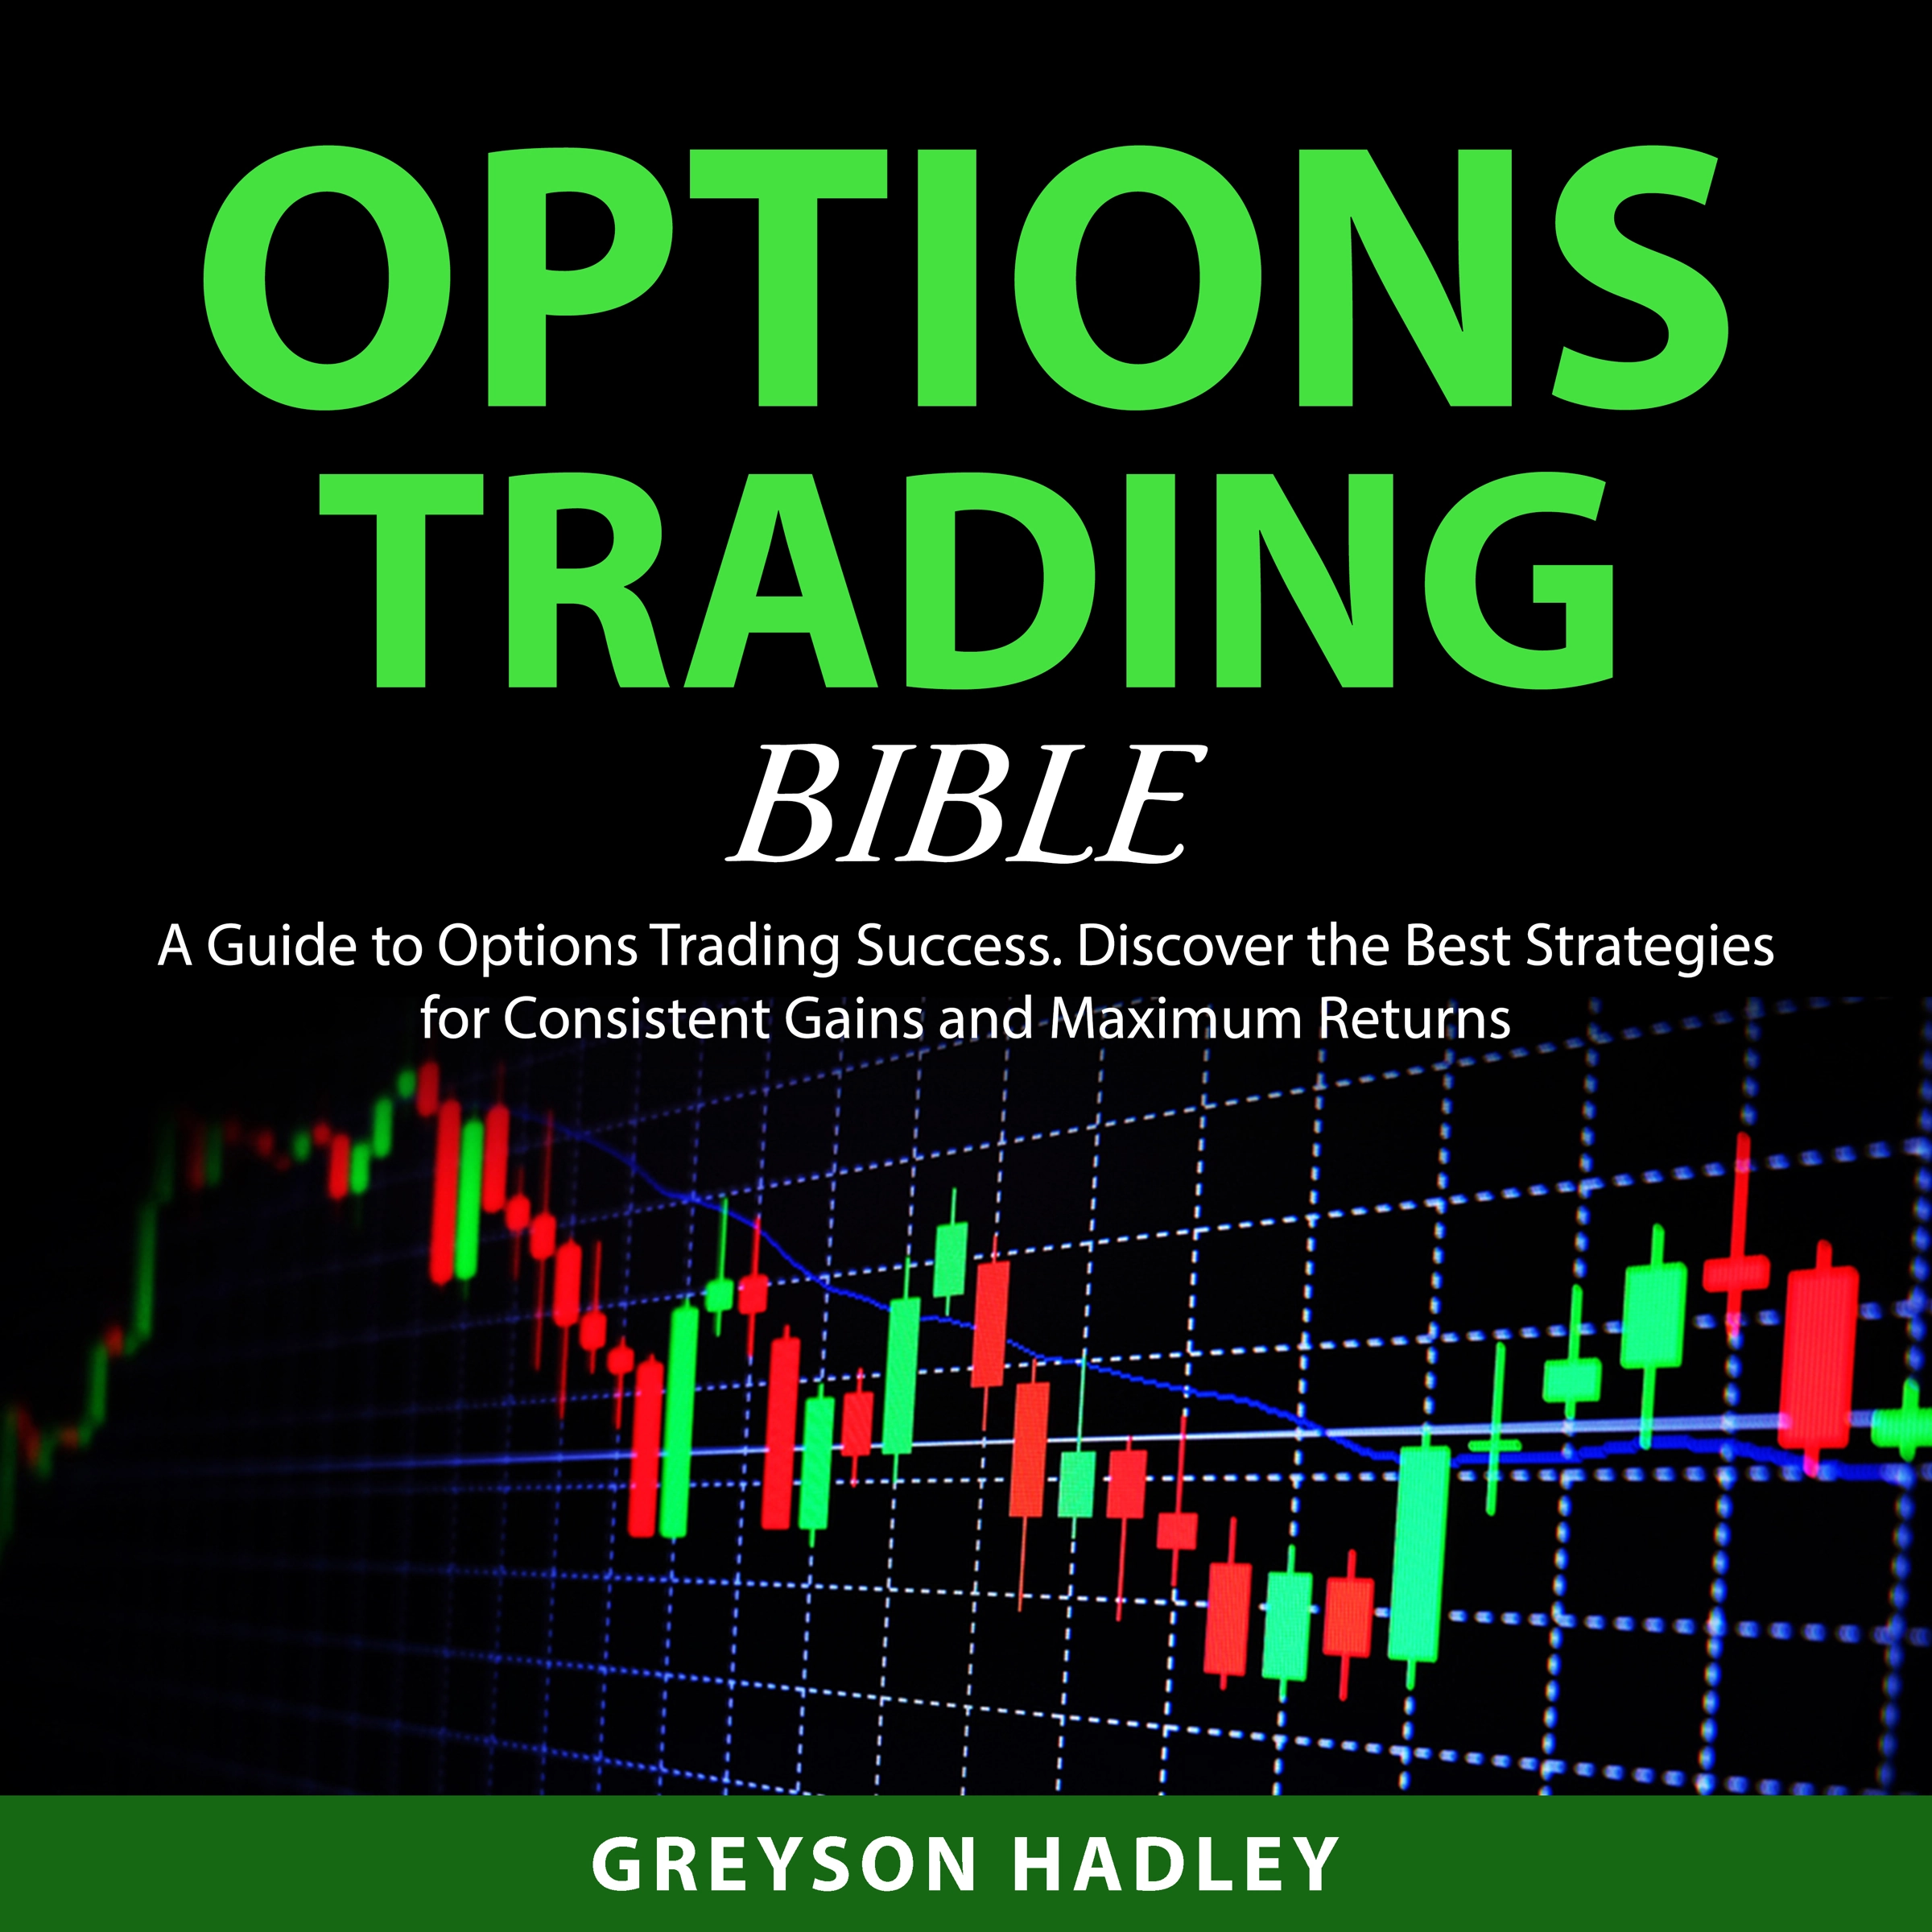 Options Trading Bible by Greyson Hadley Audiobook